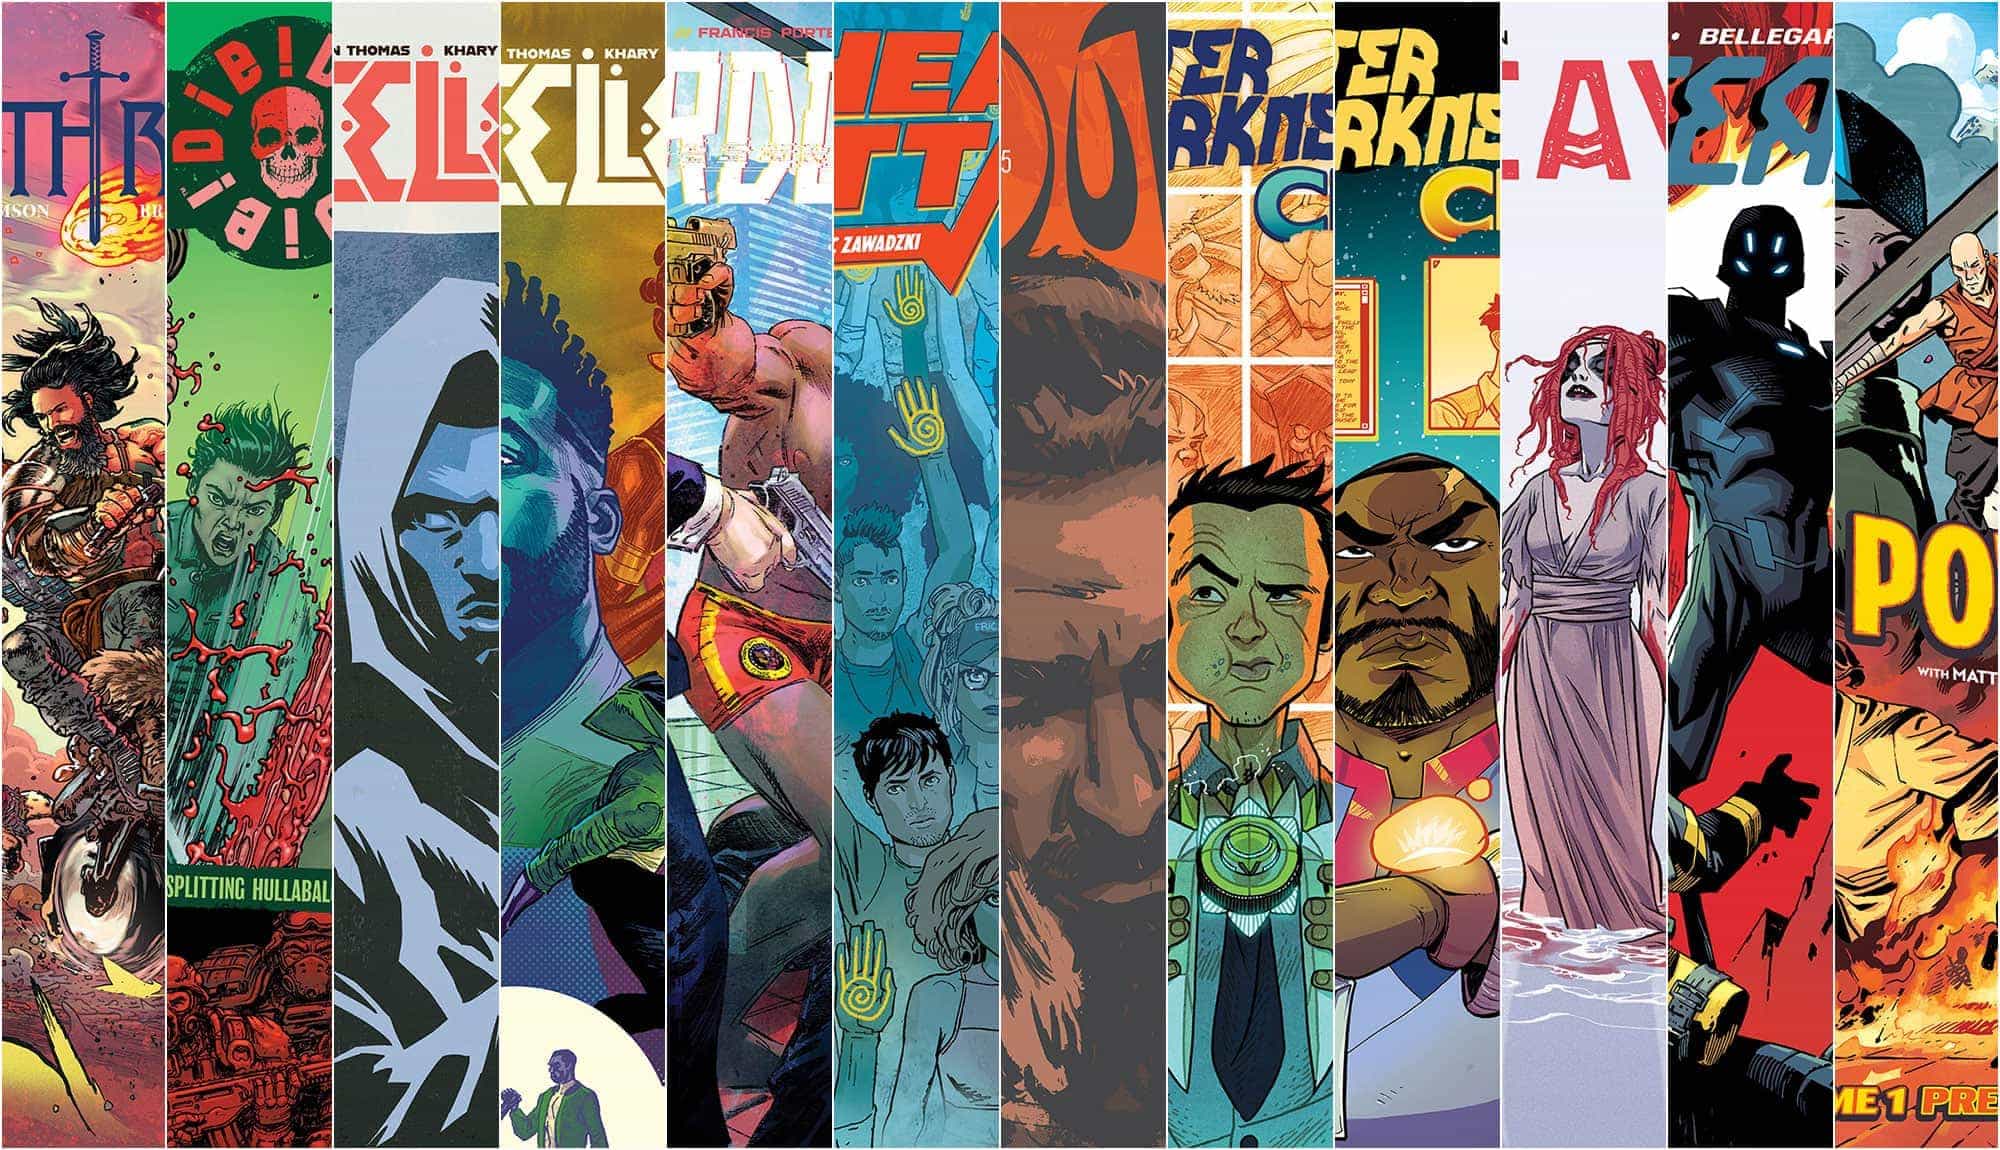 April 2020 Skybound Solicits! Books Announced!